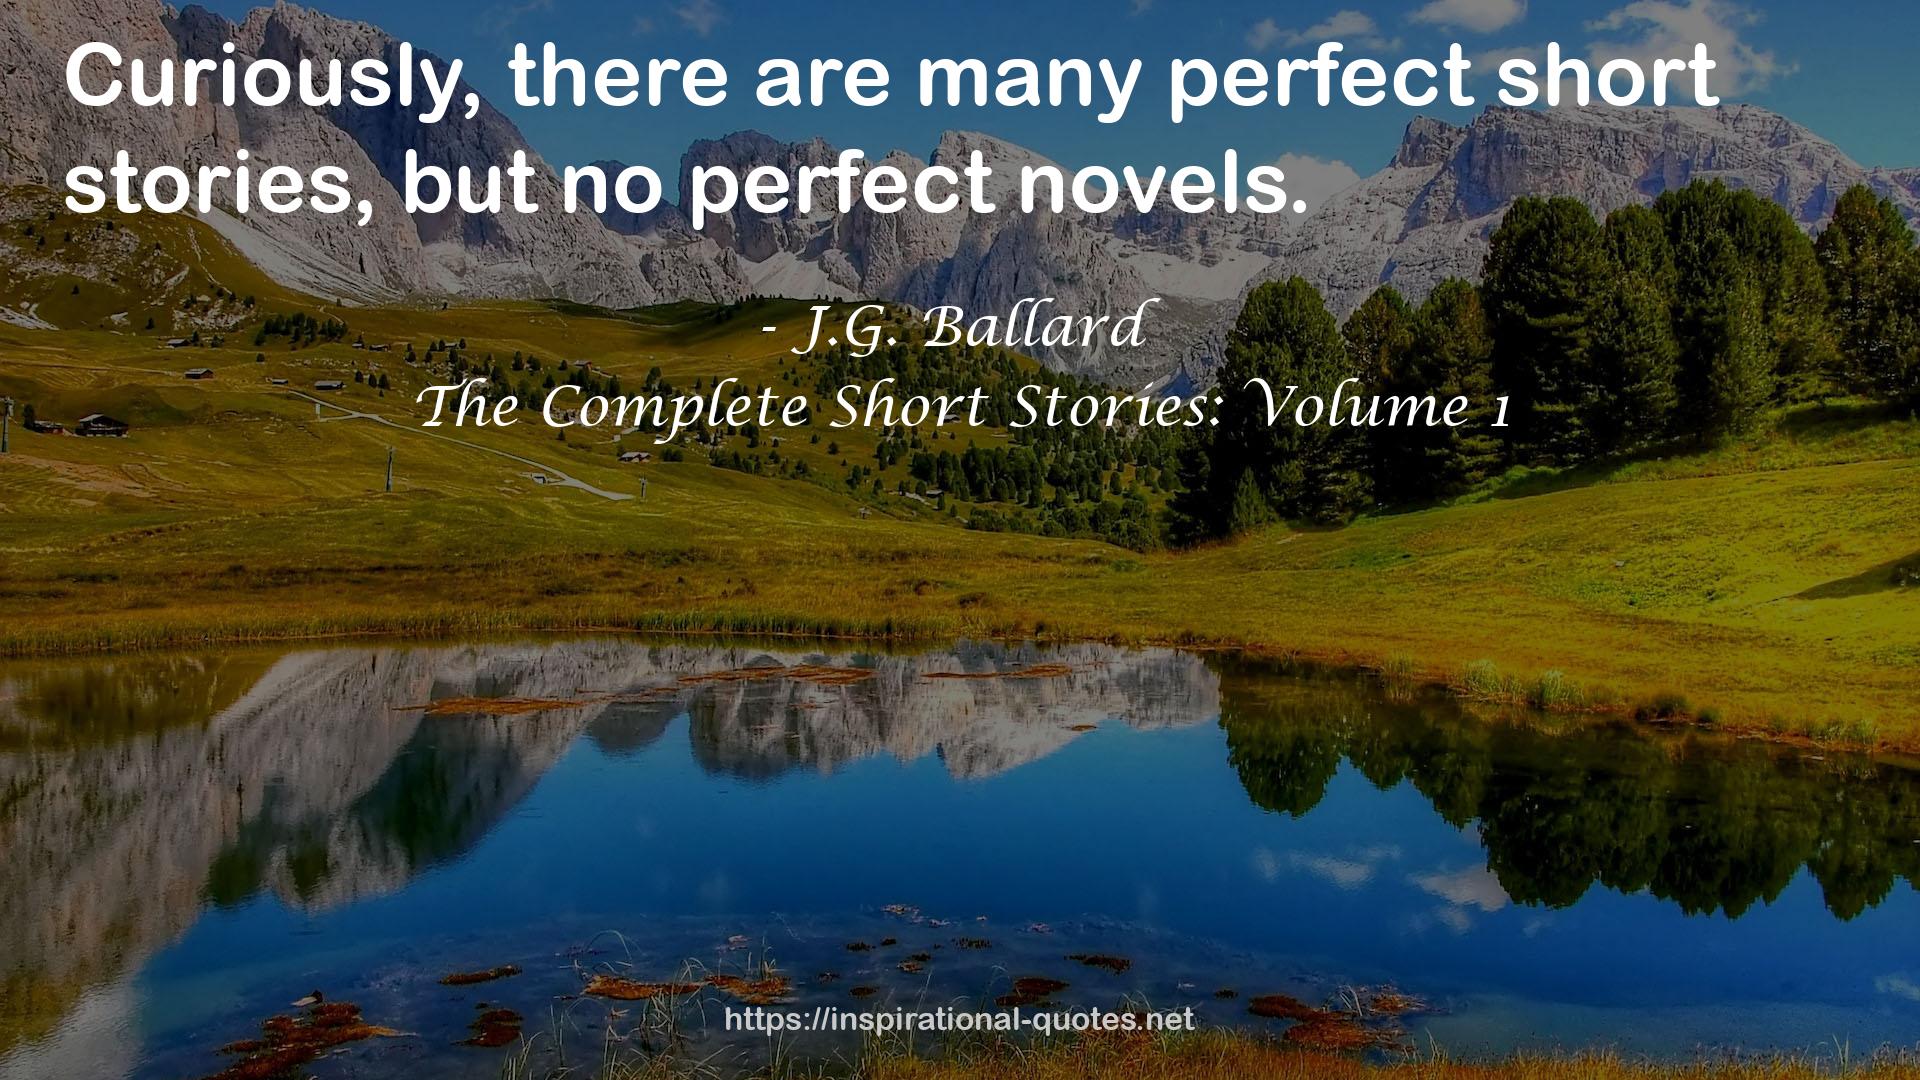 The Complete Short Stories: Volume 1 QUOTES